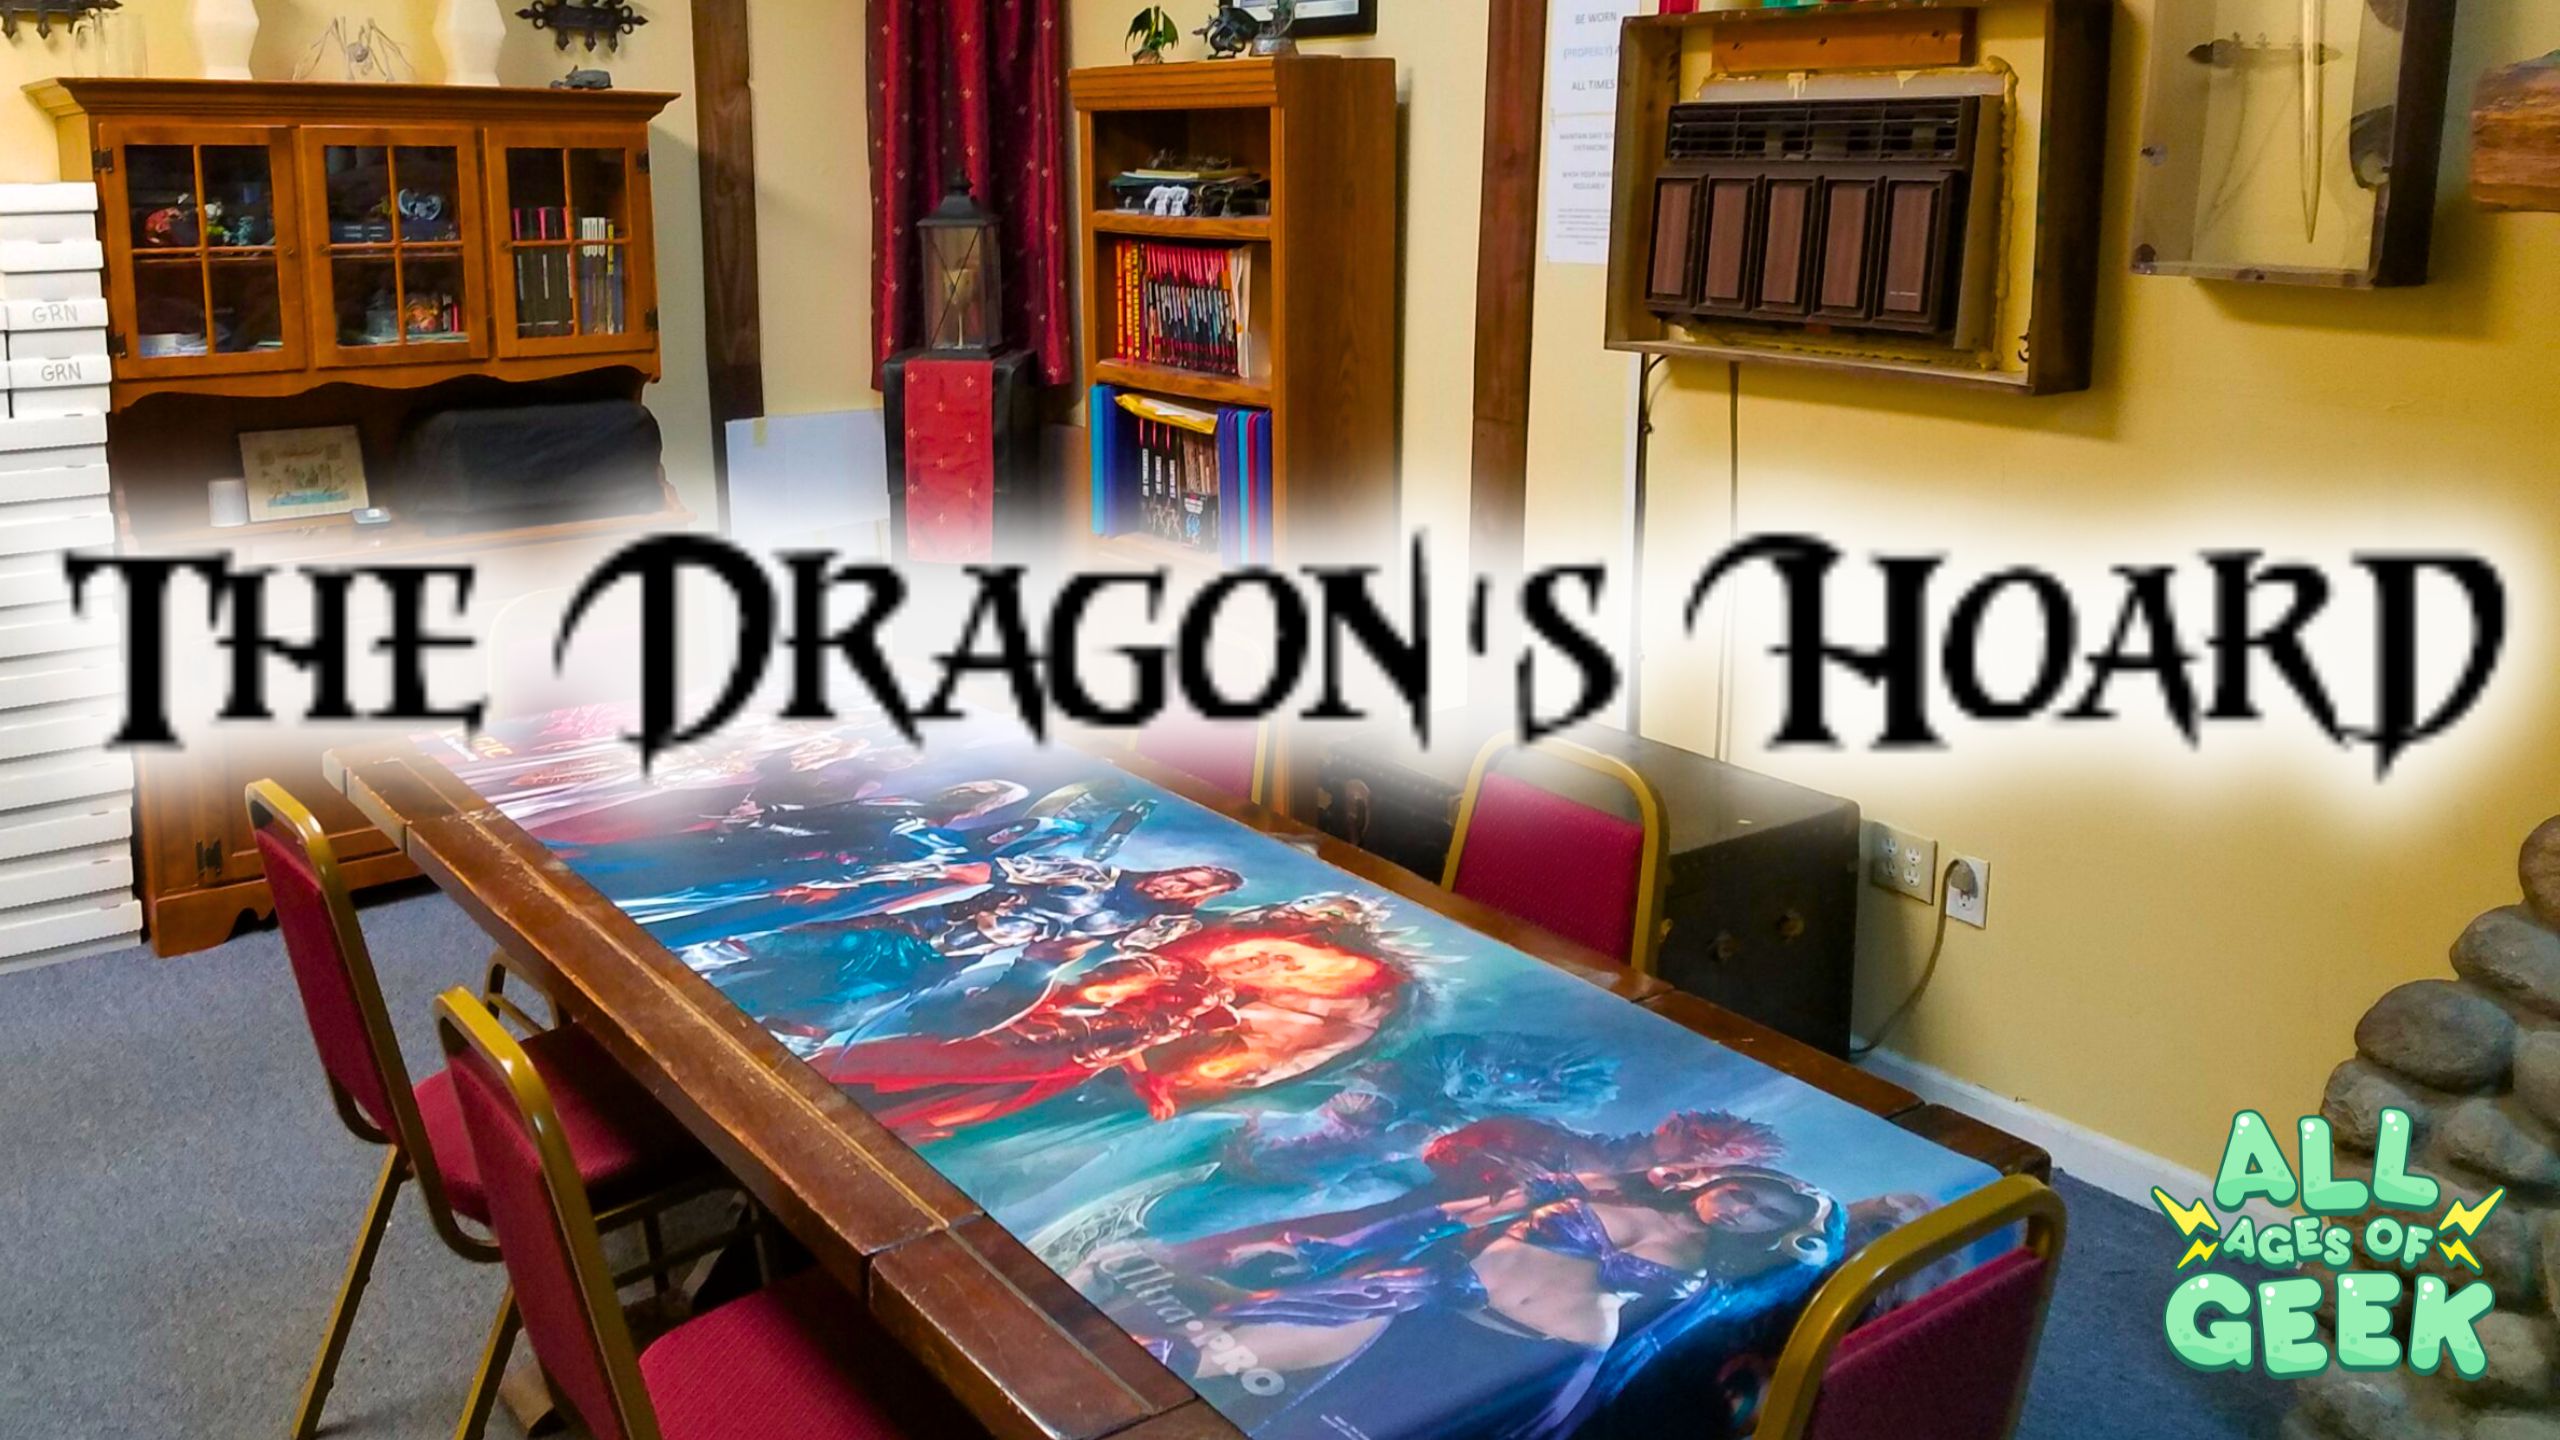 The image shows the interior of a game store with a large table in the center covered with a colorful fantasy-themed playmat. The background features shelves filled with books and gaming supplies, and there's a wooden cabinet displaying various items. The text "The Dragon's Hoard" is prominently displayed in the foreground, and the "All Ages of Geek" logo is located at the bottom right corner. The overall atmosphere is cozy and inviting, perfect for gamers.